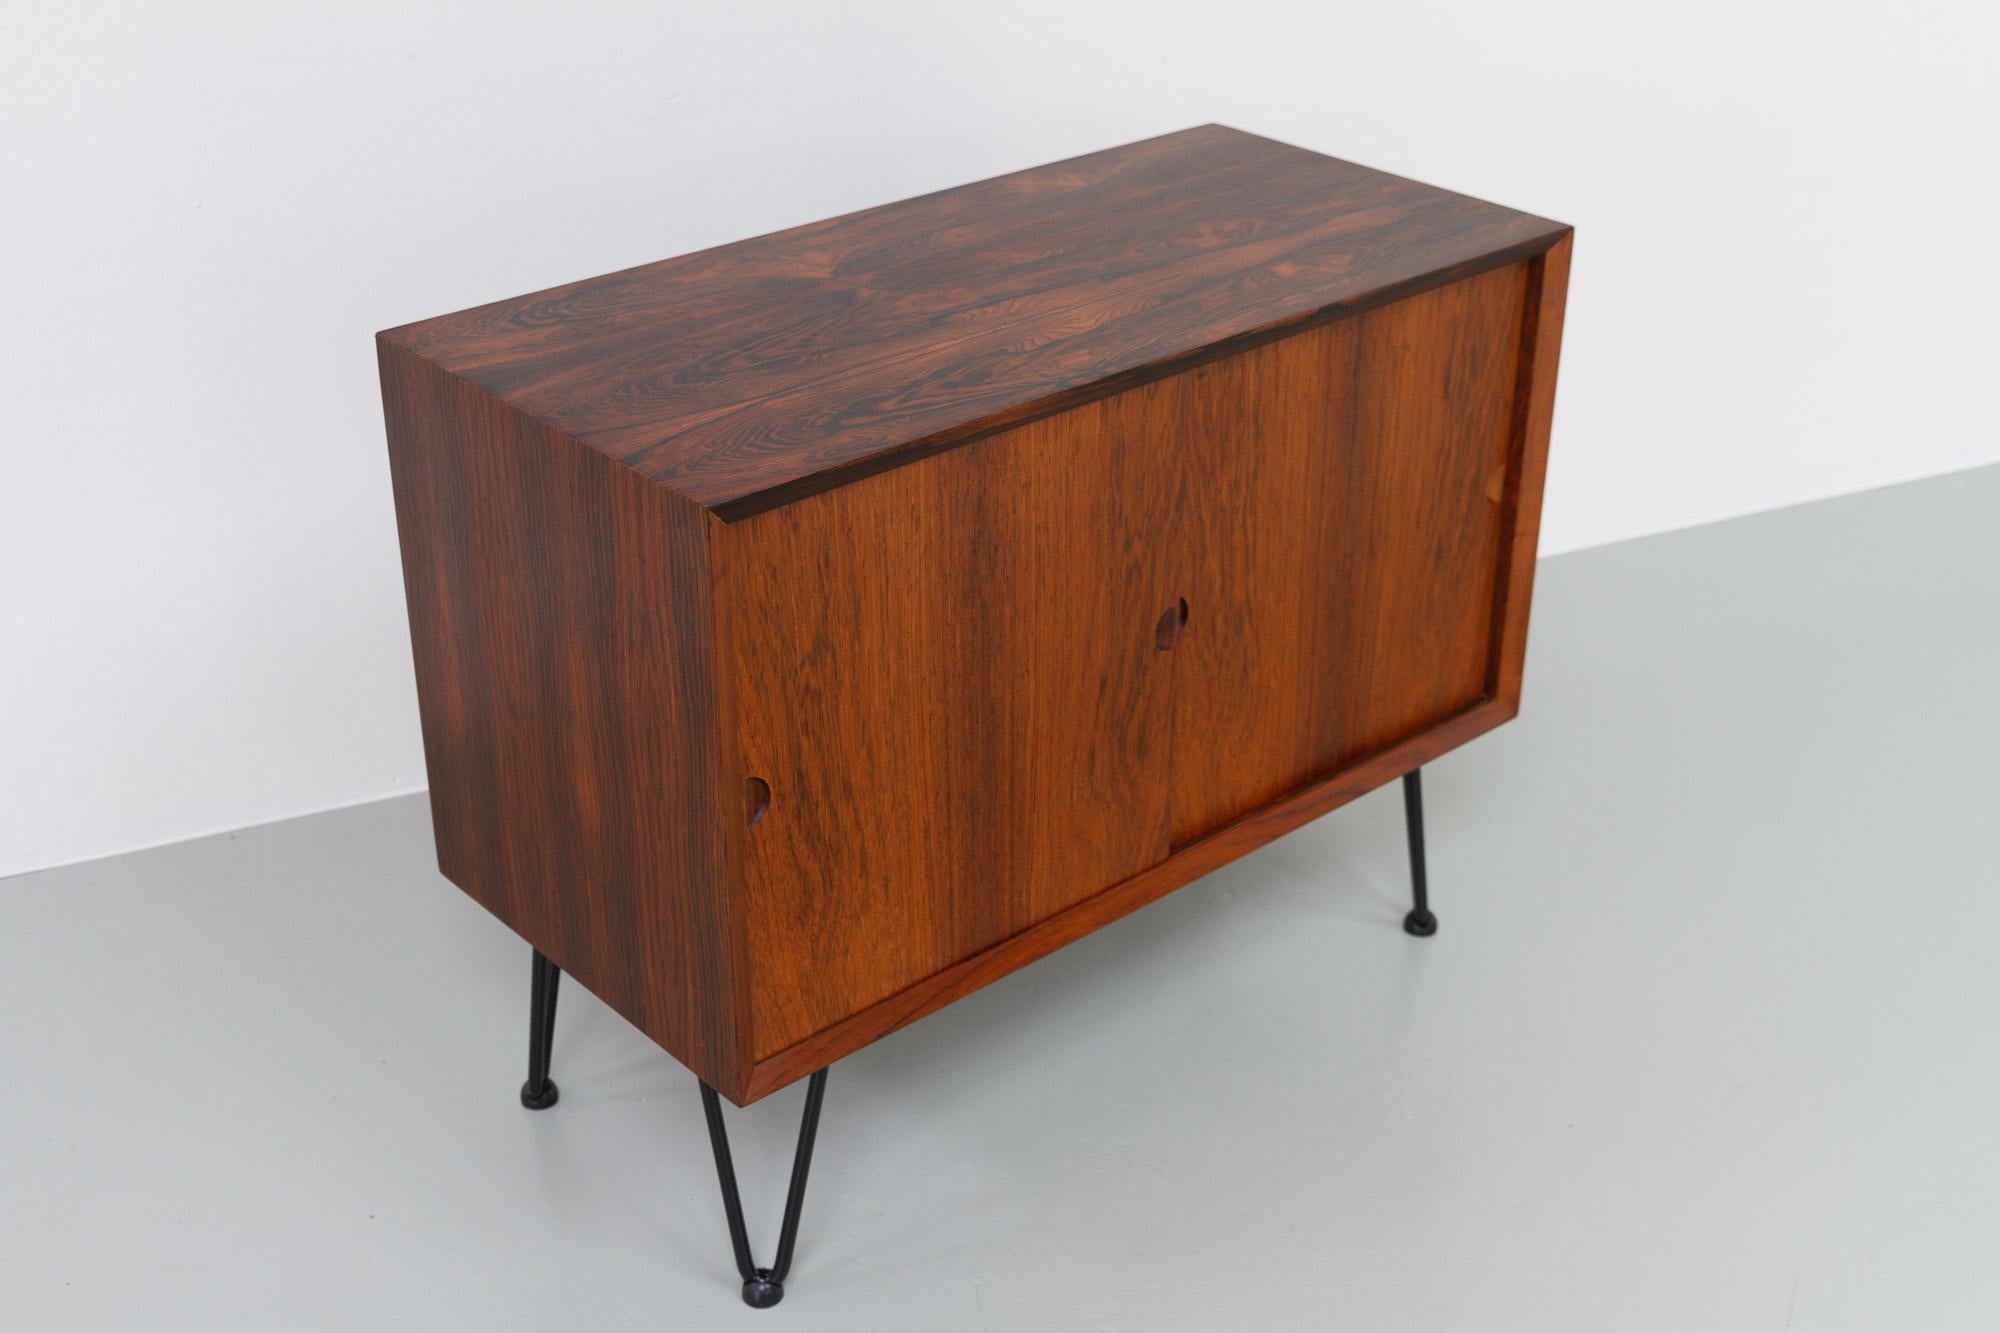 Small Danish Modern Rosewood Sideboard by Poul Cadovius for Cado, Denmark, 1960s.
Vintage Danish Rosewood sideboard with sliding doors and one adjustable shelf inside. Stunning Rosewood/palisander veneer with expressive grain pattern on top. Fitted